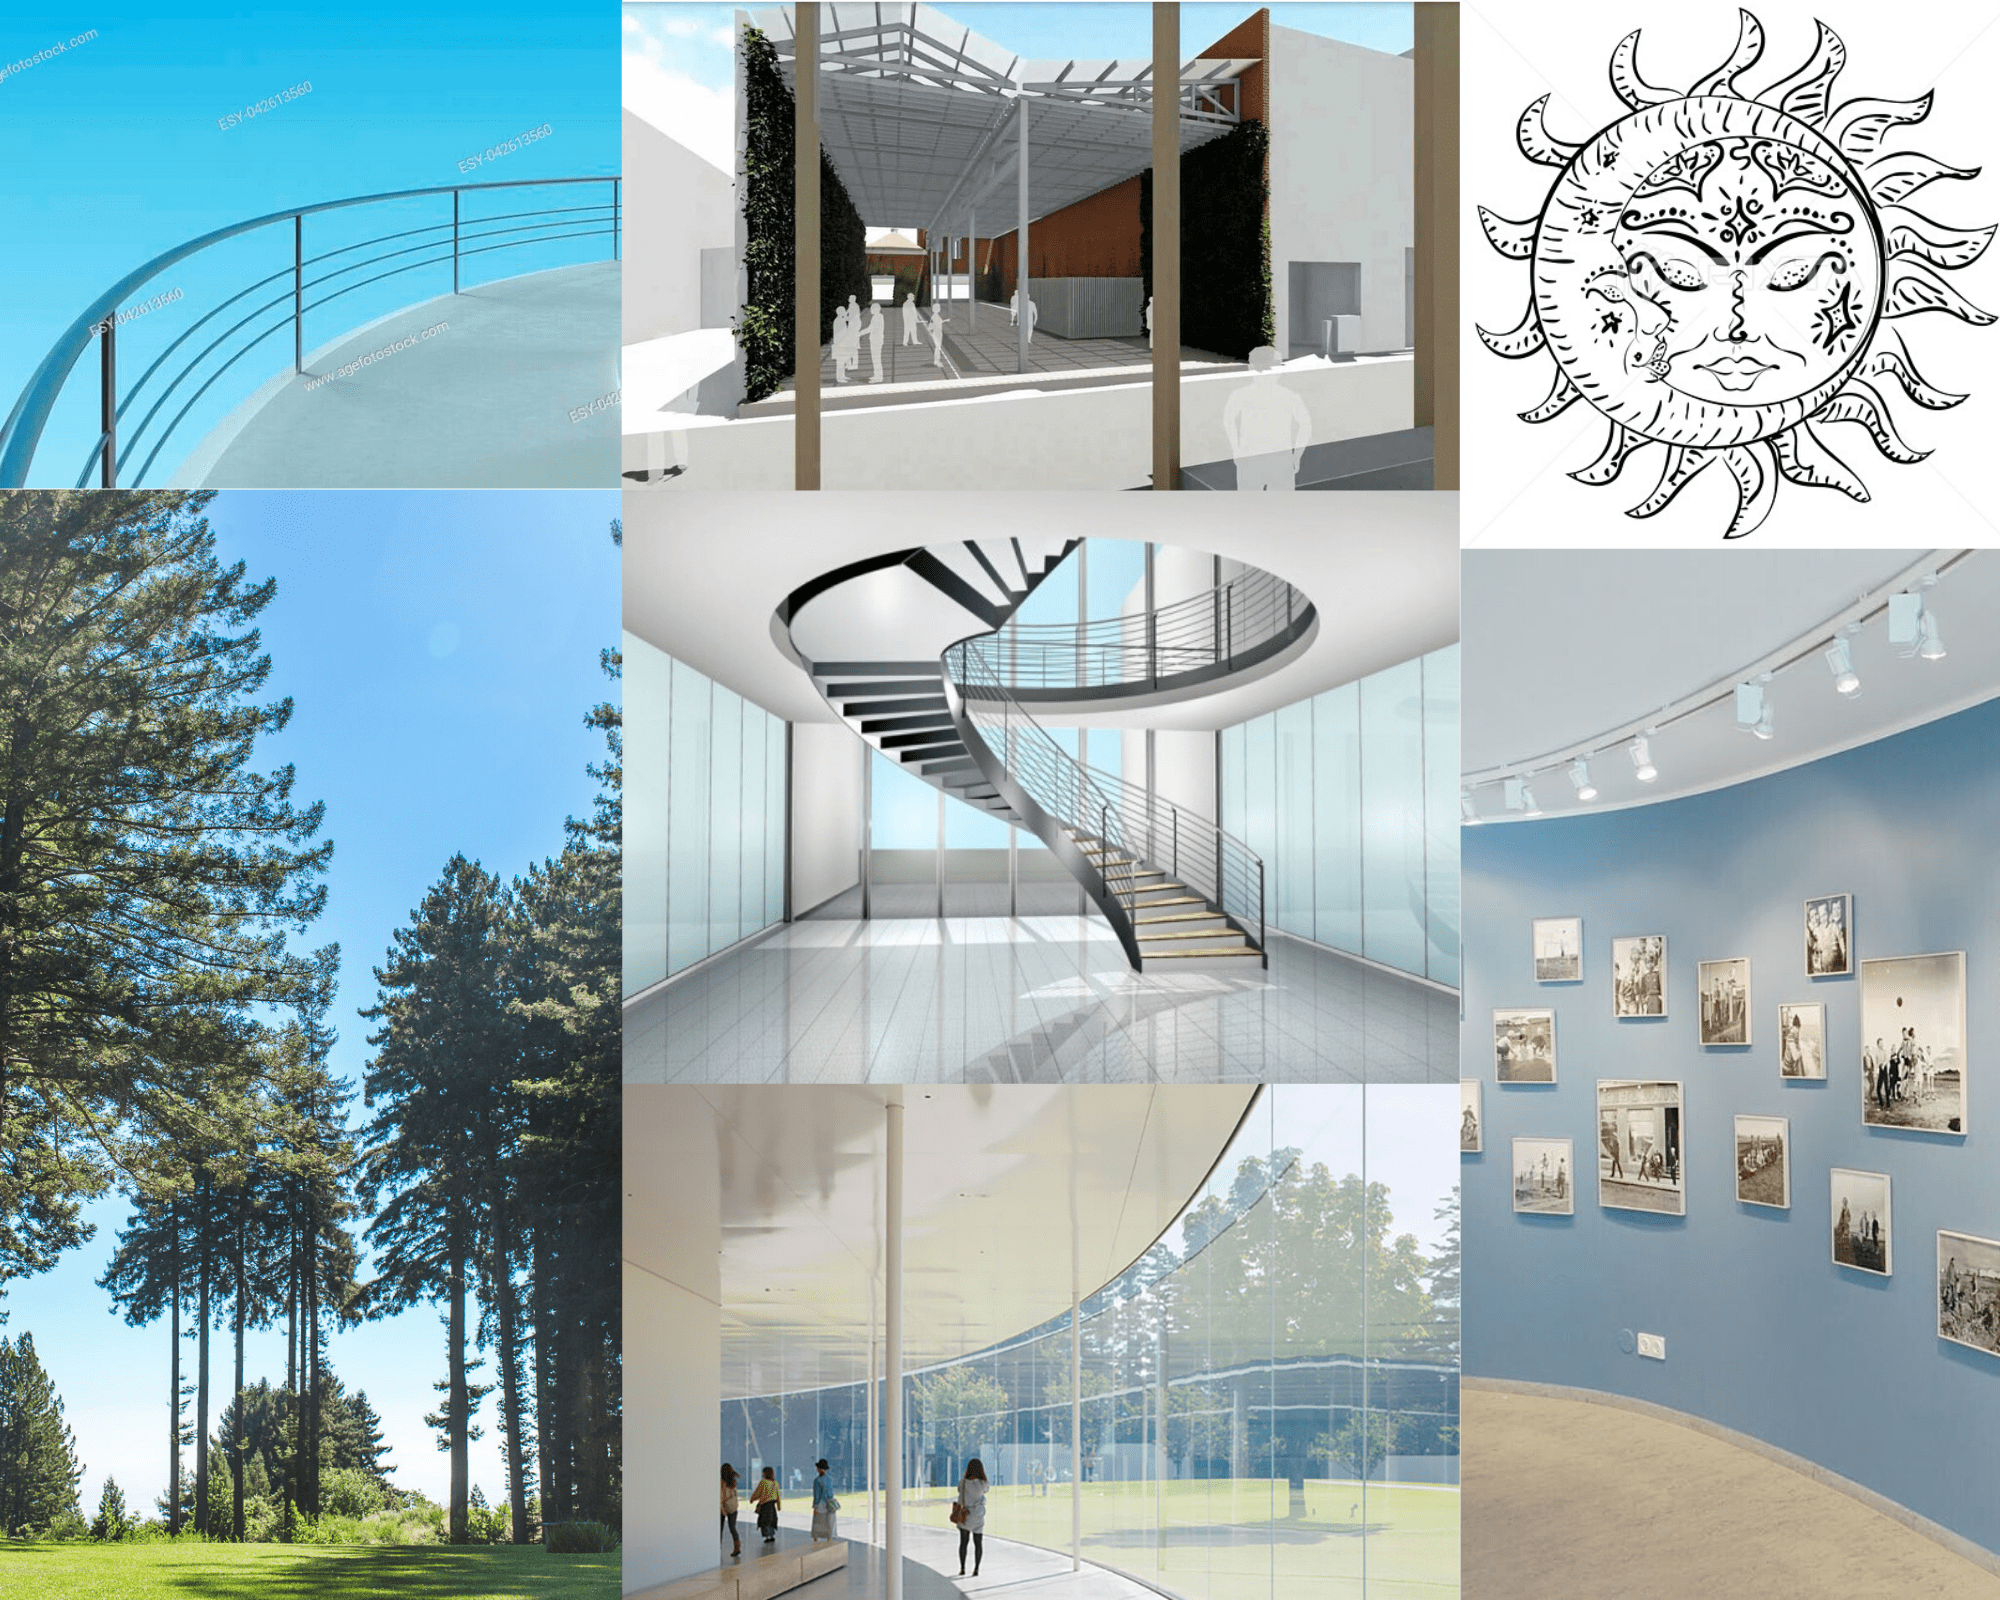 moodboard of the pavilion